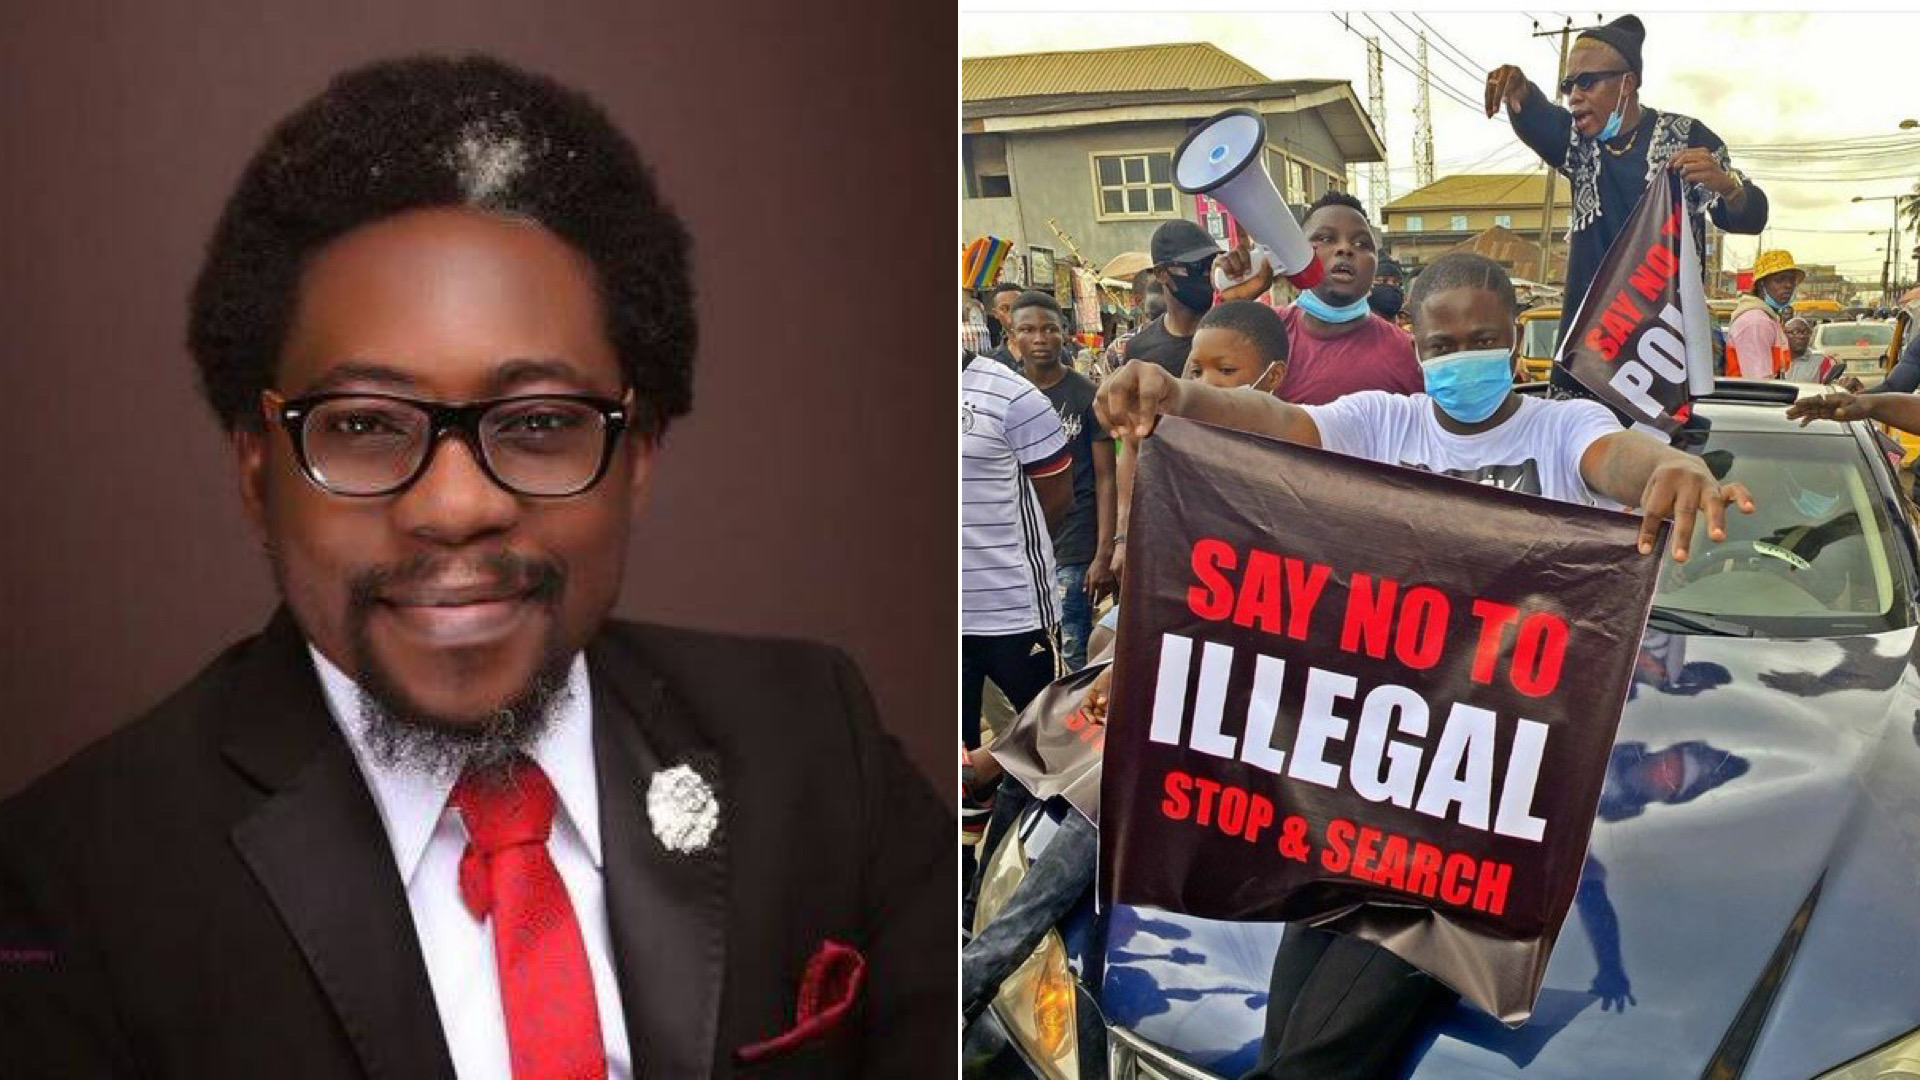 EndSARS: ‘Protest Won’t Stop Now, Authorities Not Listening To The People’ – Activist Segalink